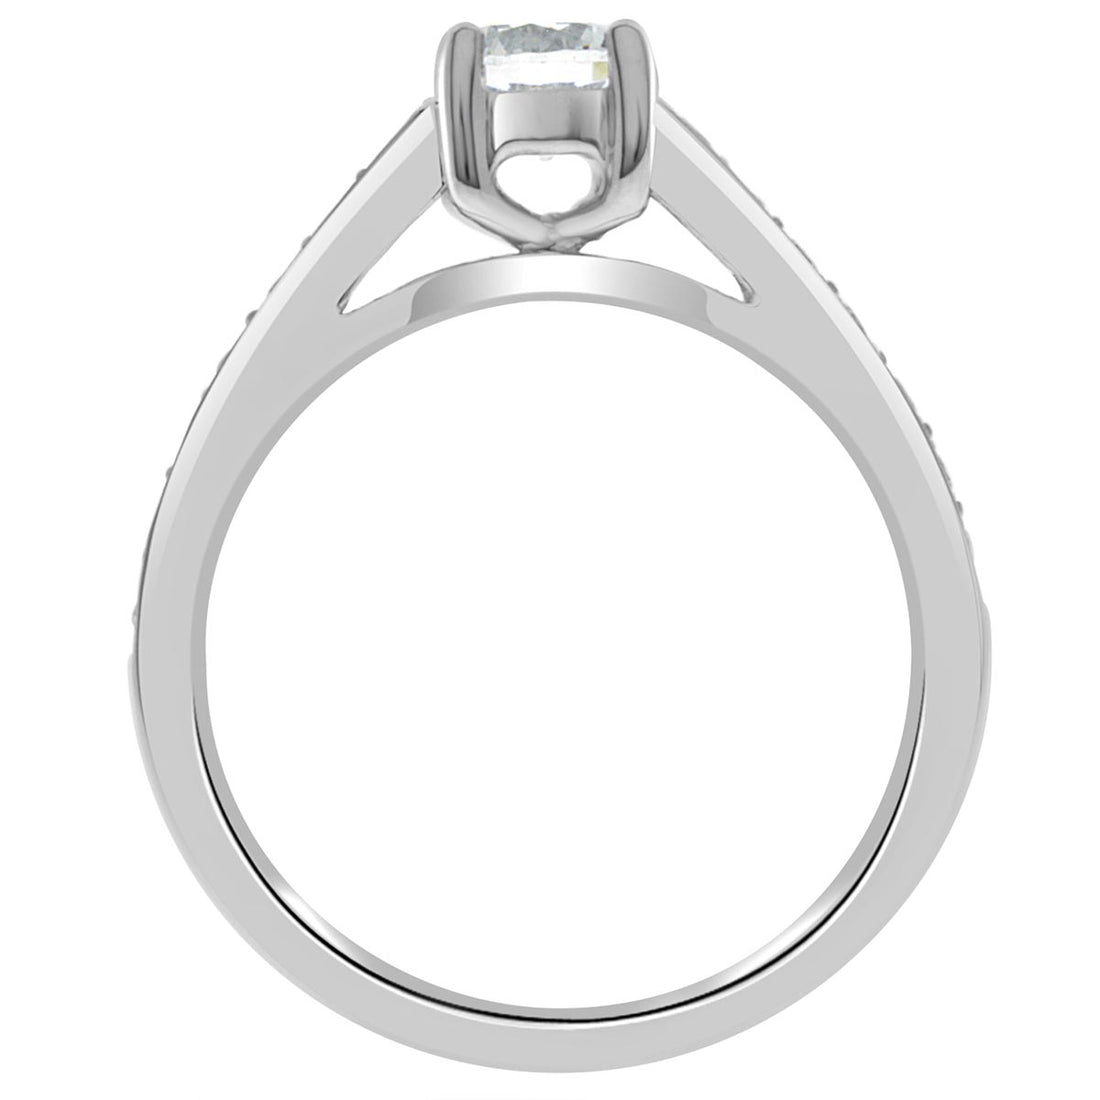 Princess Cut Bezel Ring set in white gold standing upright